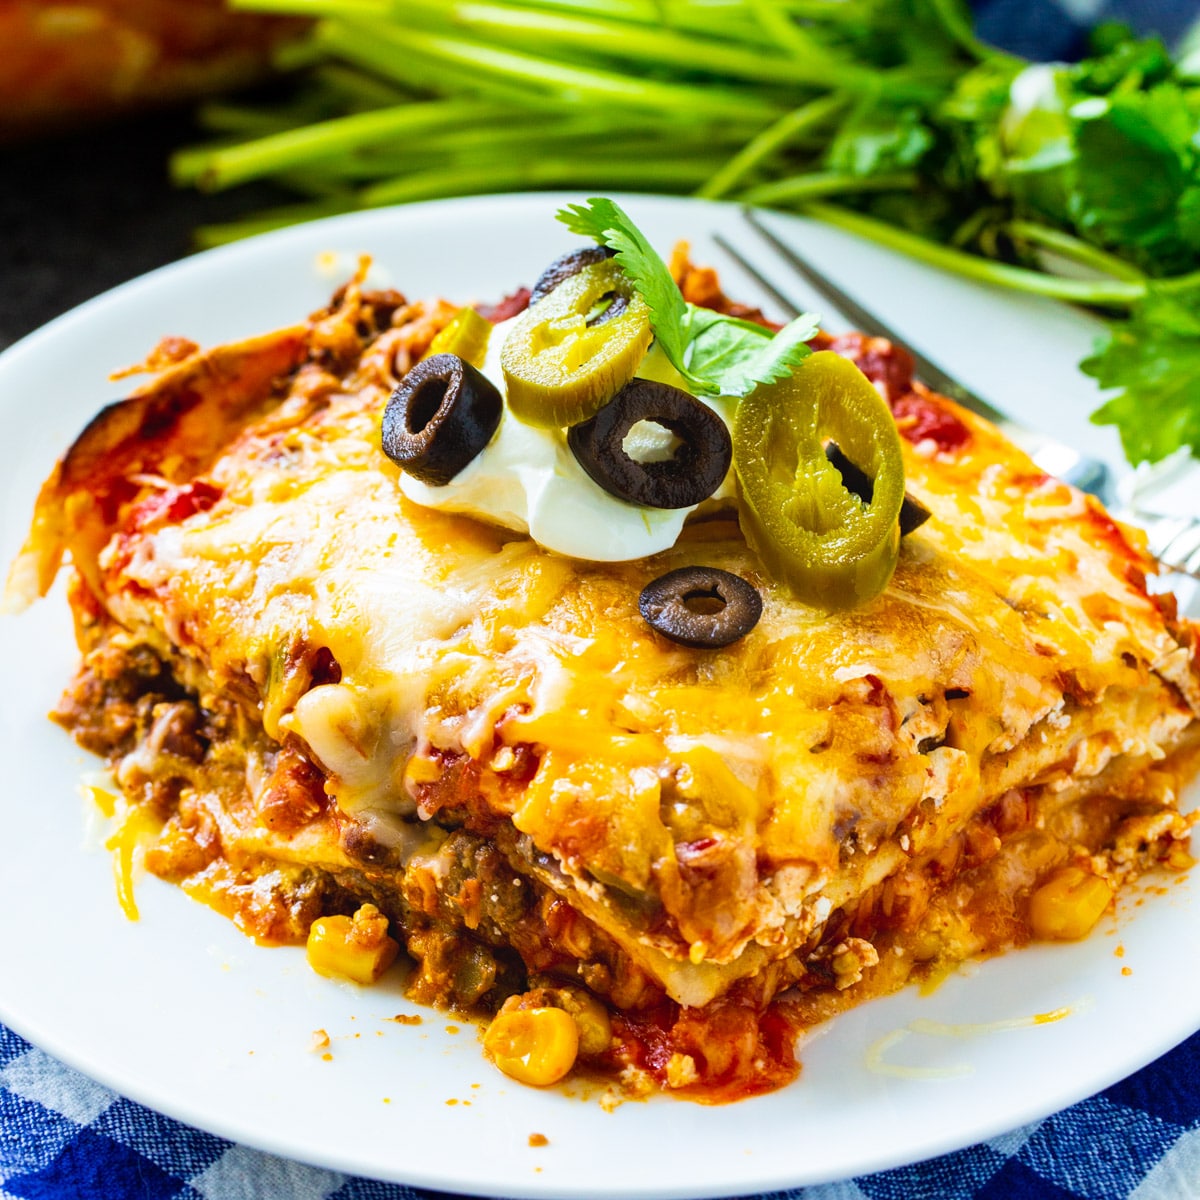 Slice of Mexican Lasagna on a plate.